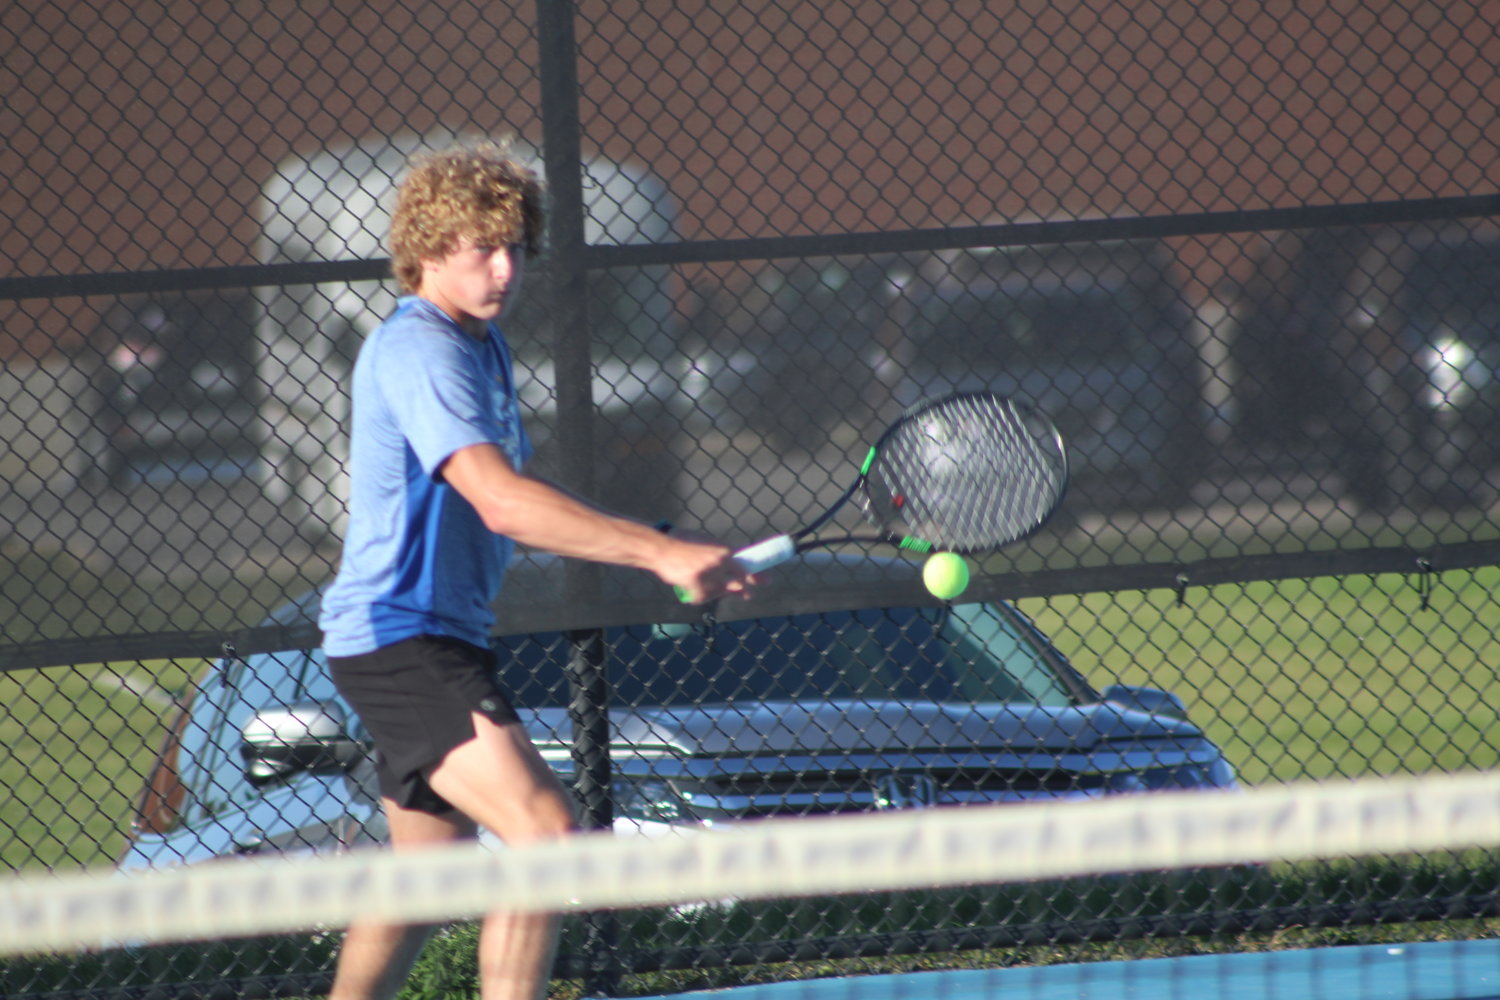 Crawfordsville’s Wyatt Motz picked up the lone win for CHS in the Regional loss to Terre Haute South on Tuesday.